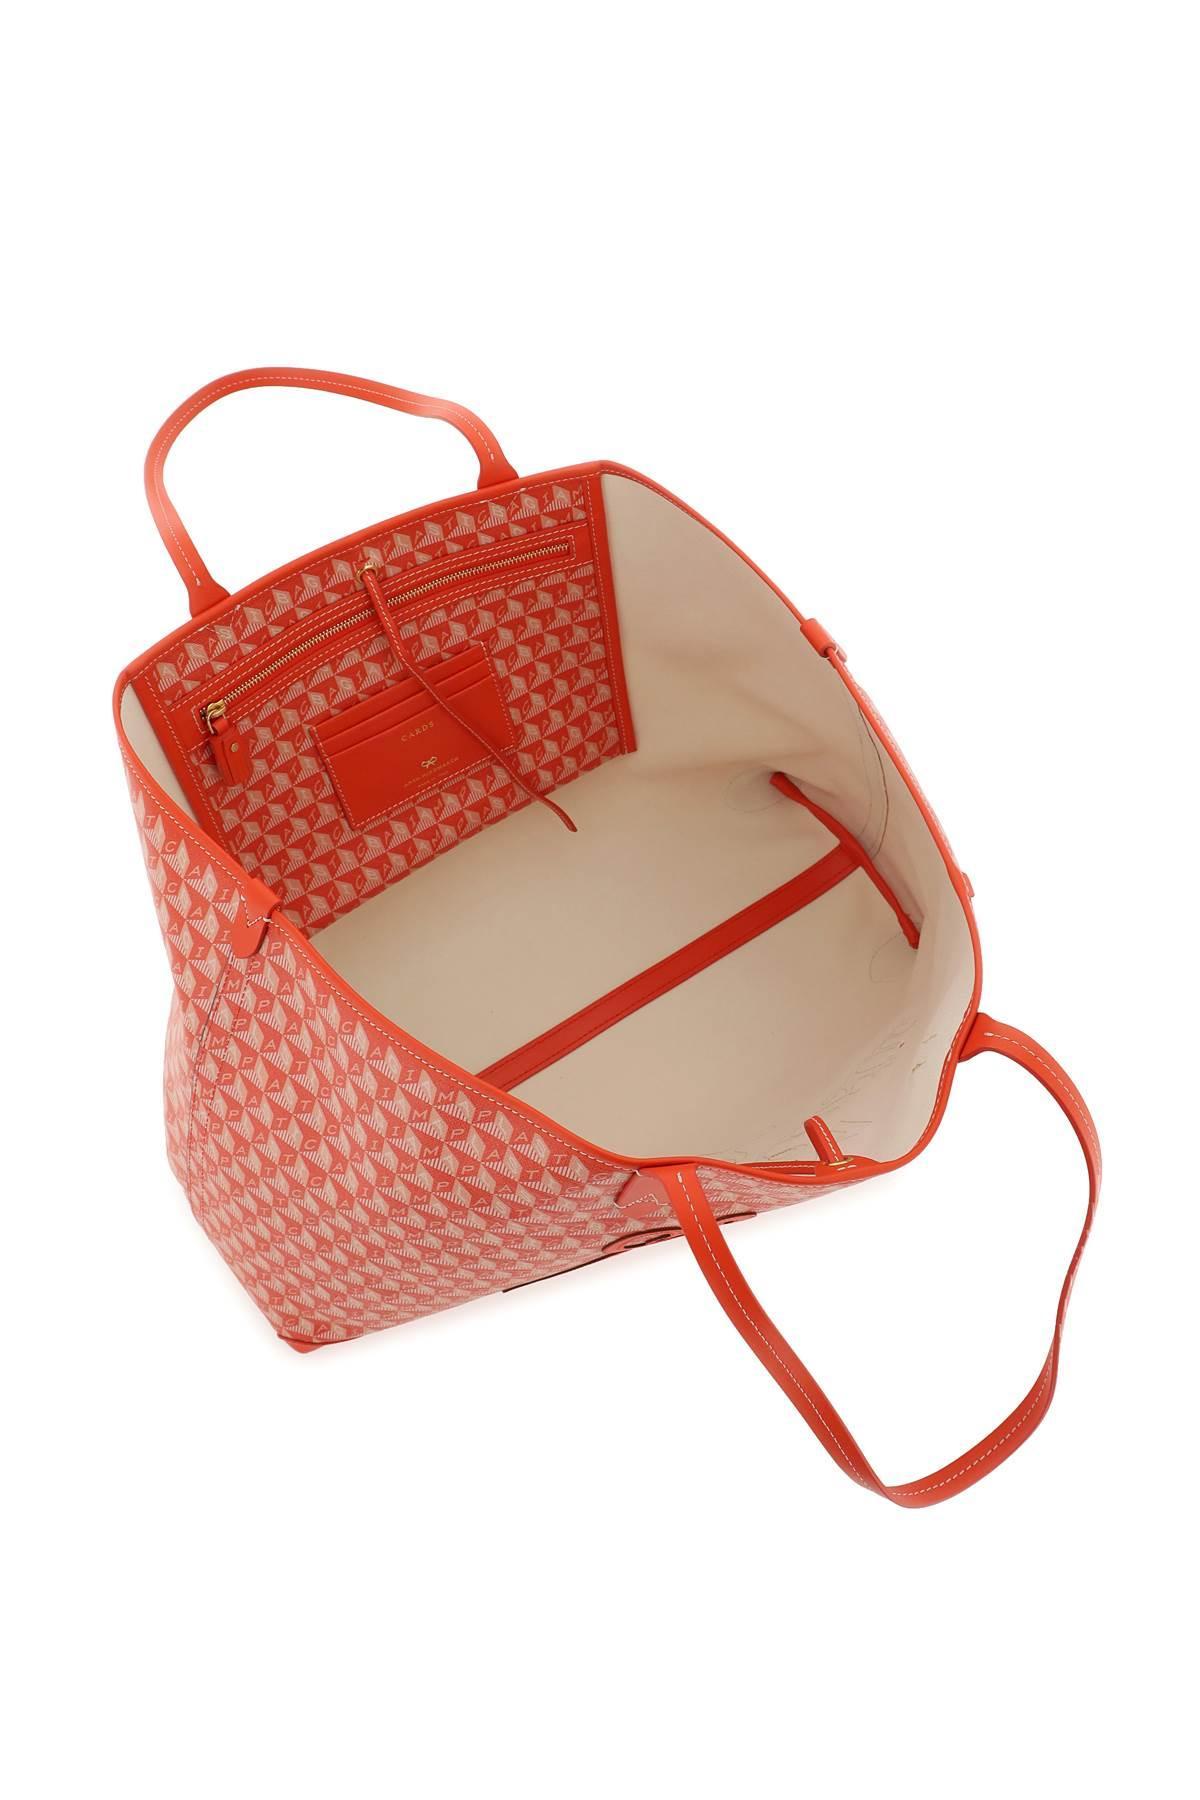 Anya Hindmarch 'i Am A Plastic Bag' Tote Bag in Red | Lyst